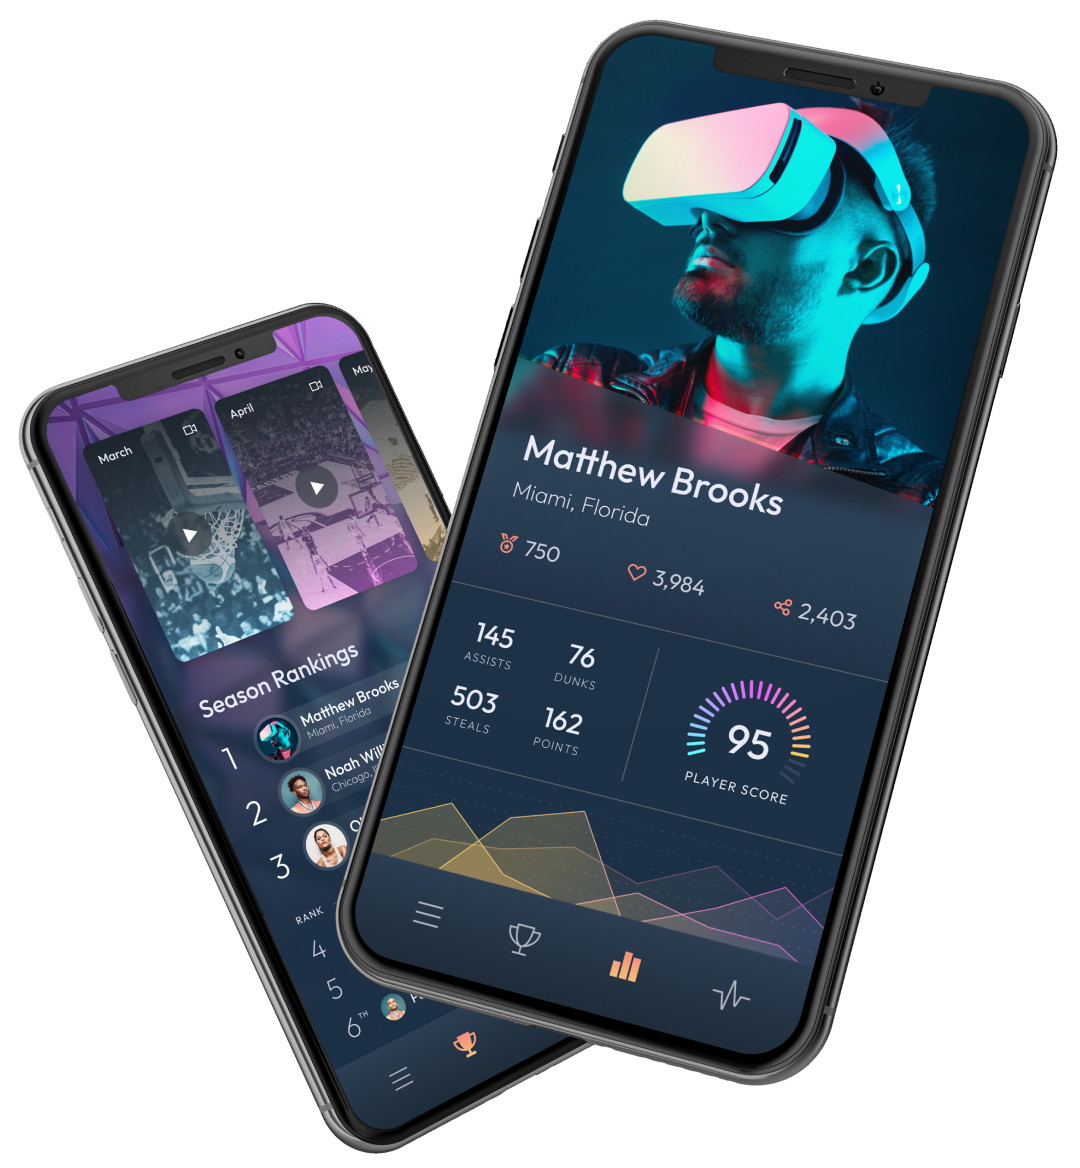 Mobile Phone Screens Showing A Virtual Reality Sports App In Dark Mode